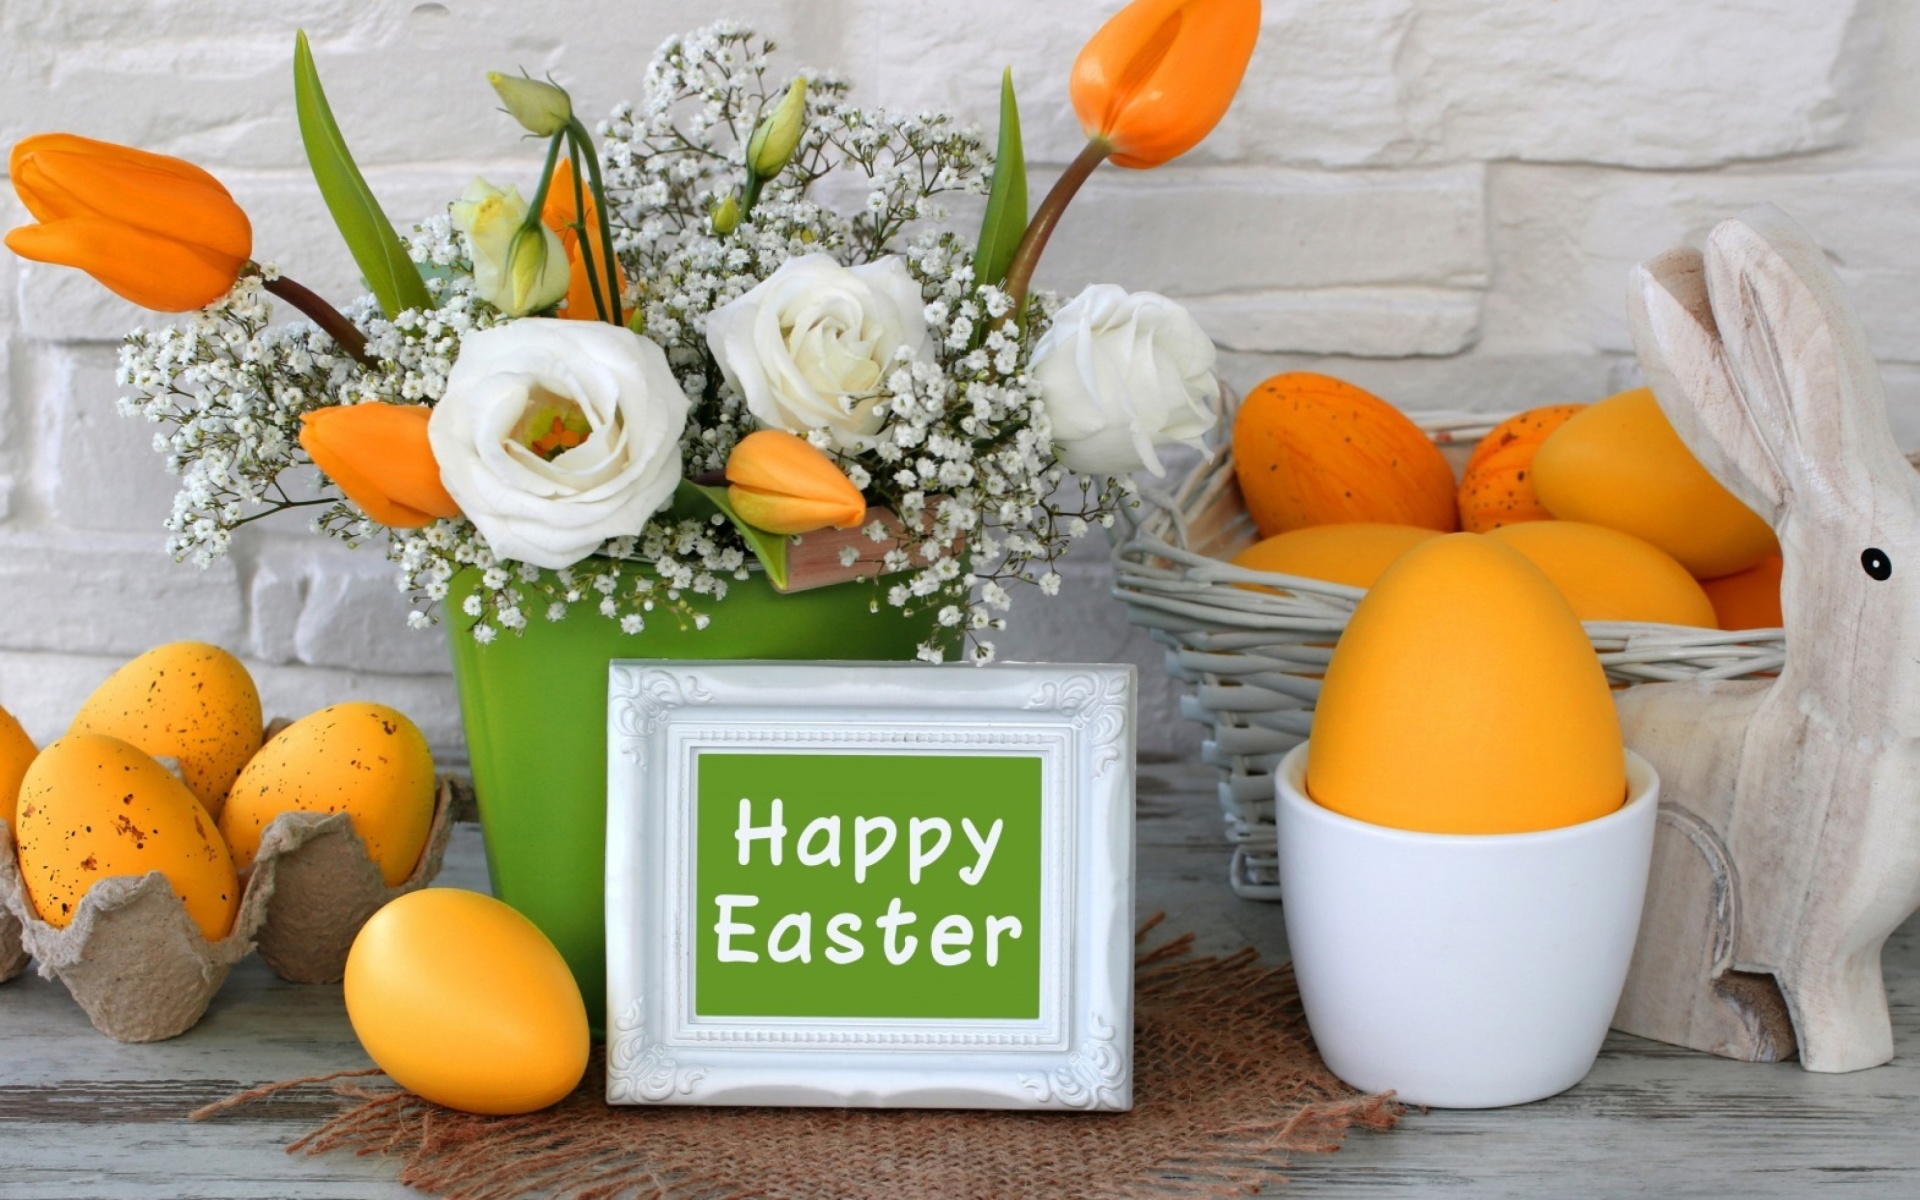 Easter decoration with yellow eggs and bunny screenshot #1 1920x1200